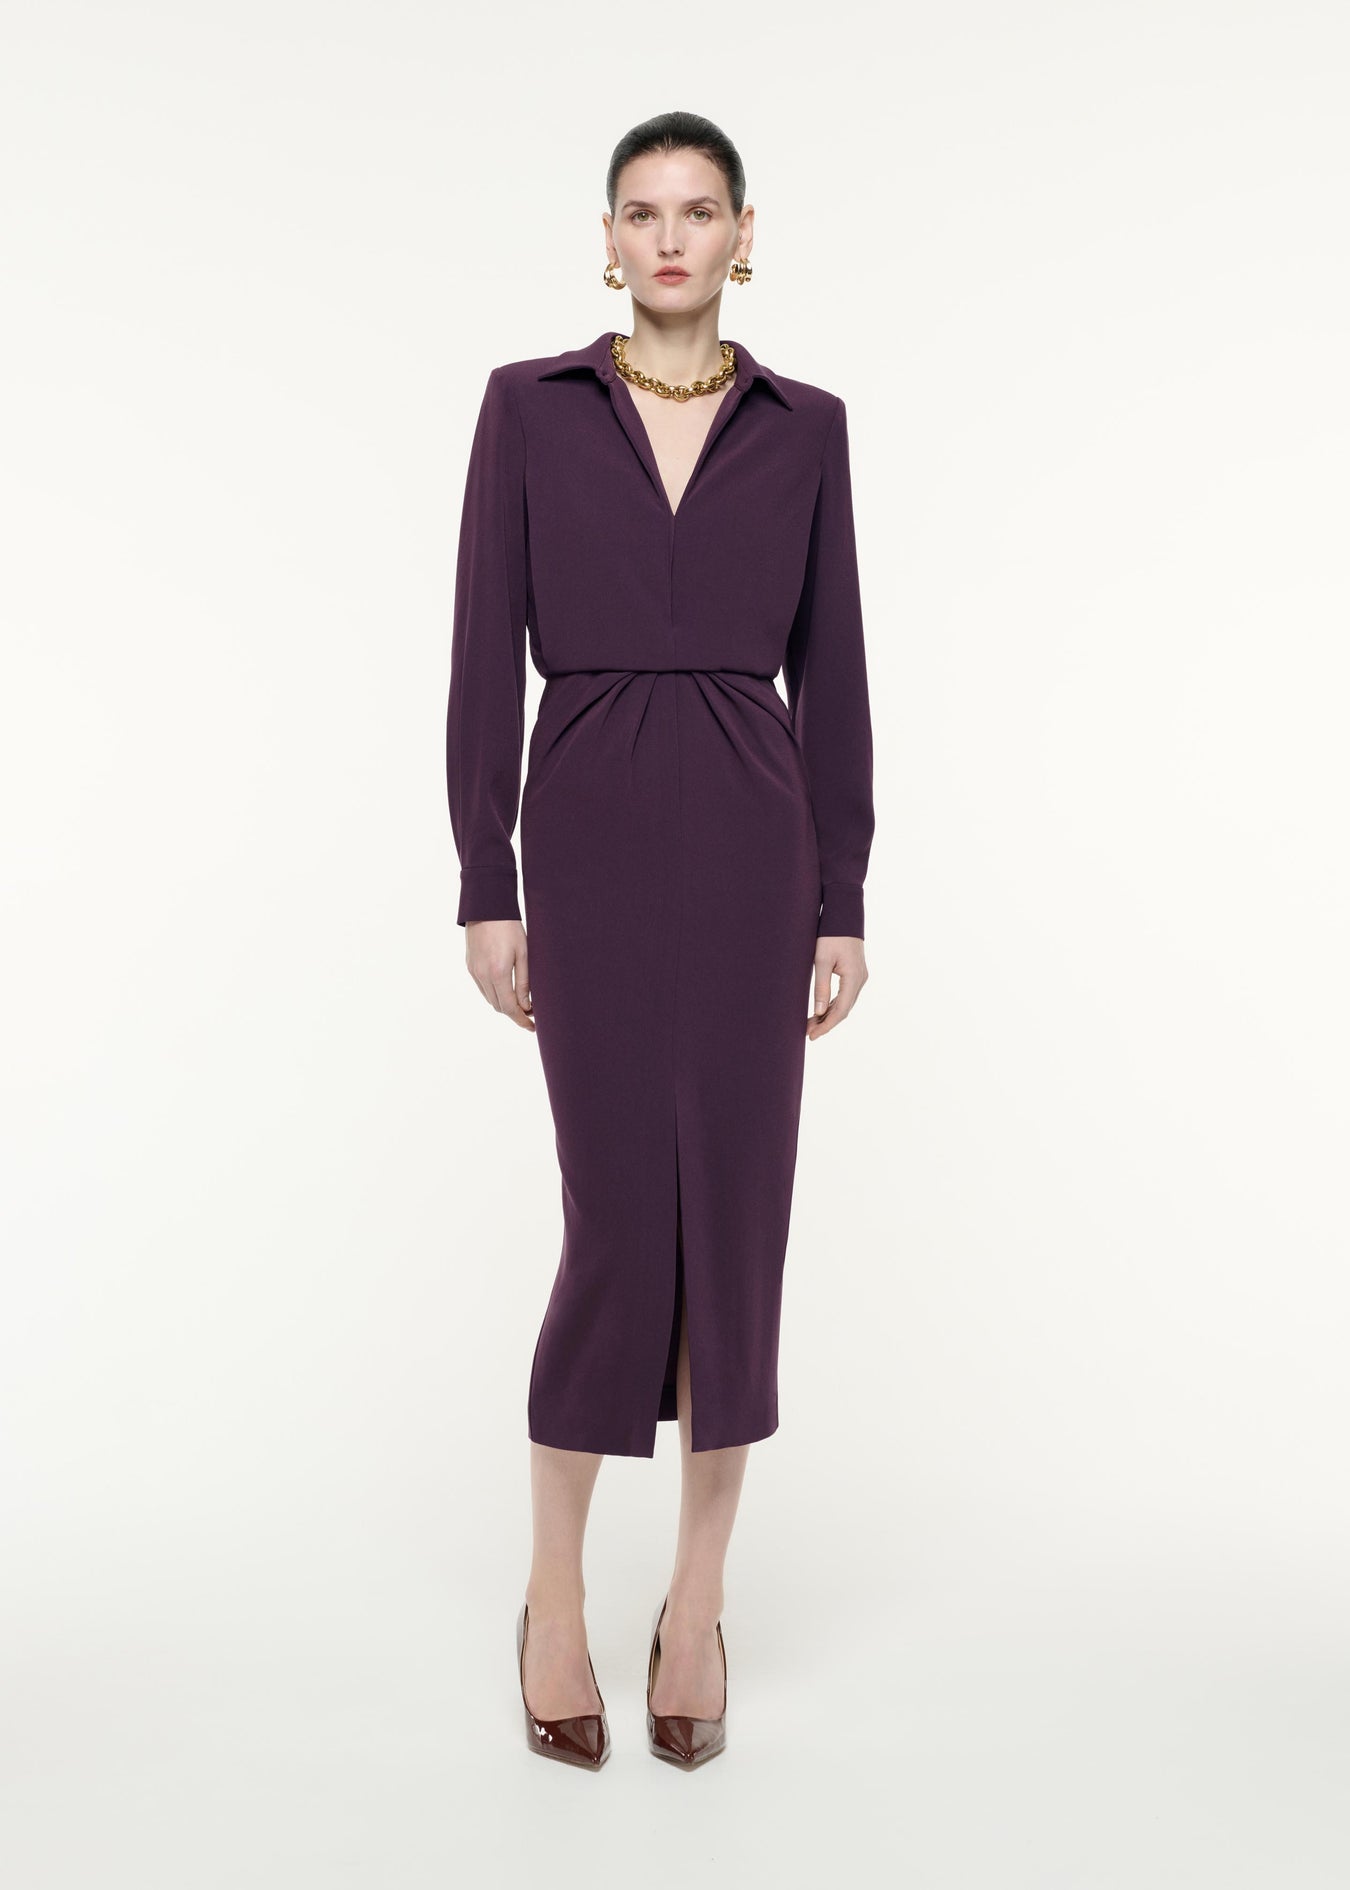 A front view image of a model wearing the Long Sleeve Satin Crepe Midi Dress in Aubergine